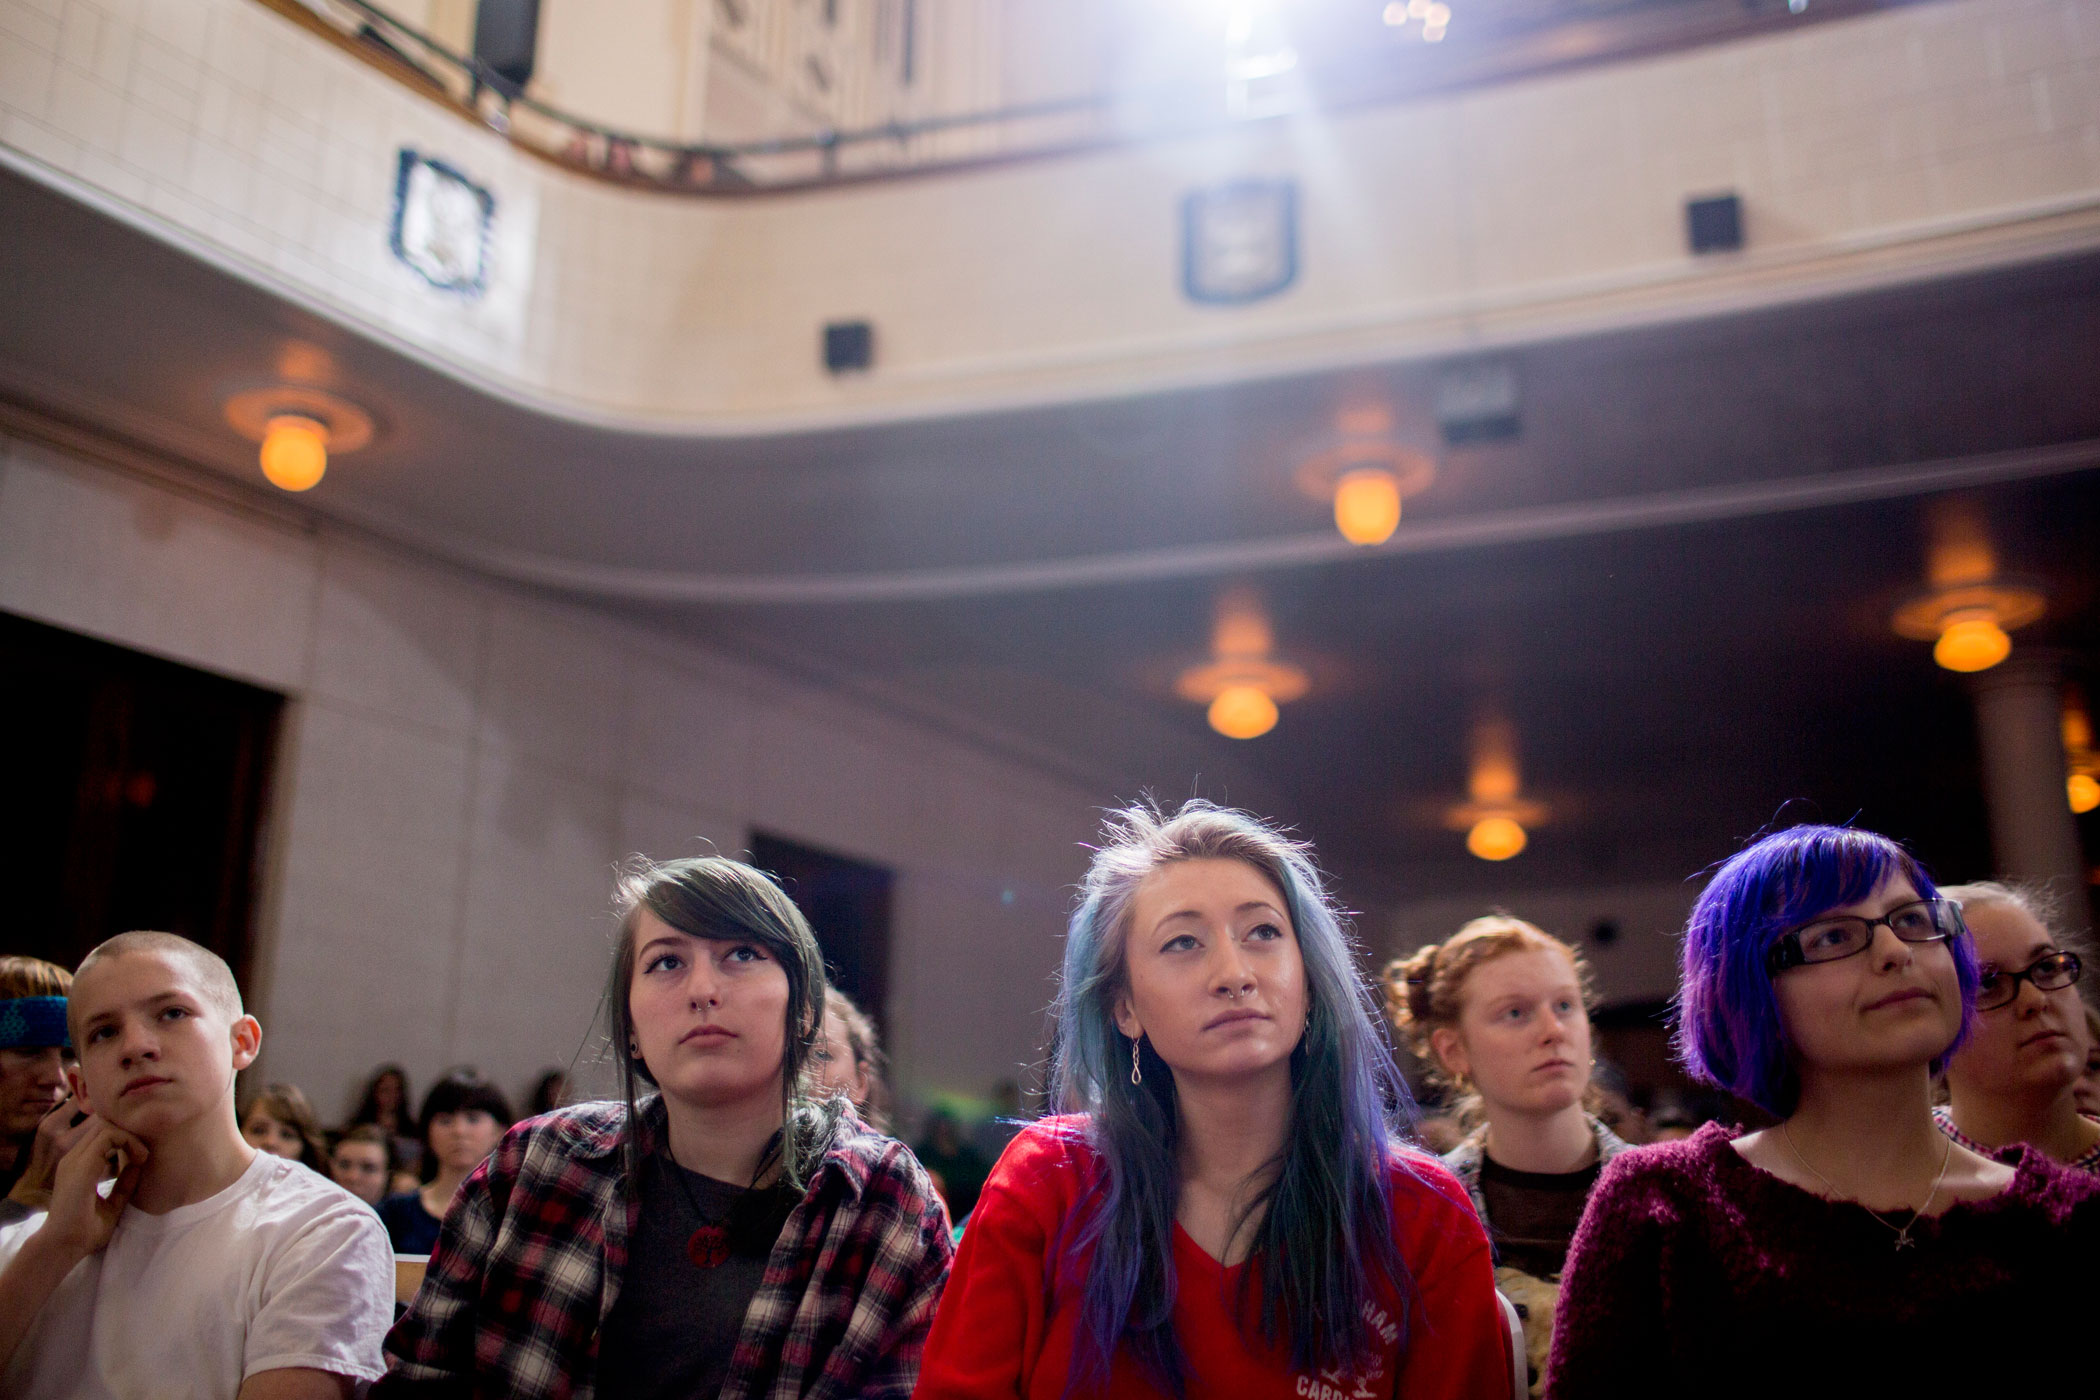 Students listen to Bernie Sanders during a stop at Roosevelt High School in Des Moines, Iowa on Jan. 28, 2016.